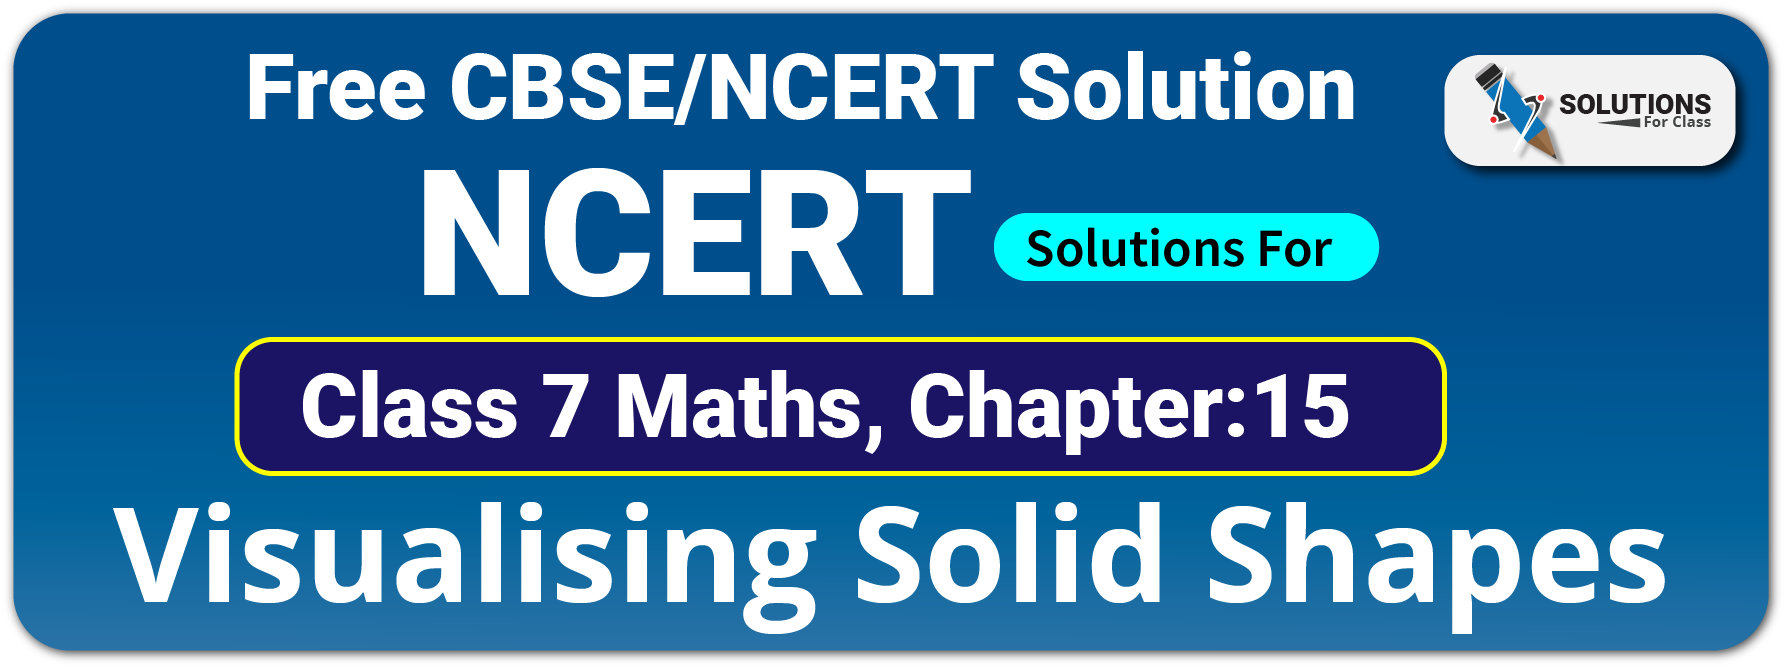 NCERT Solutions For Class 7 Maths Chapter 15 Visulising Solid Shapes